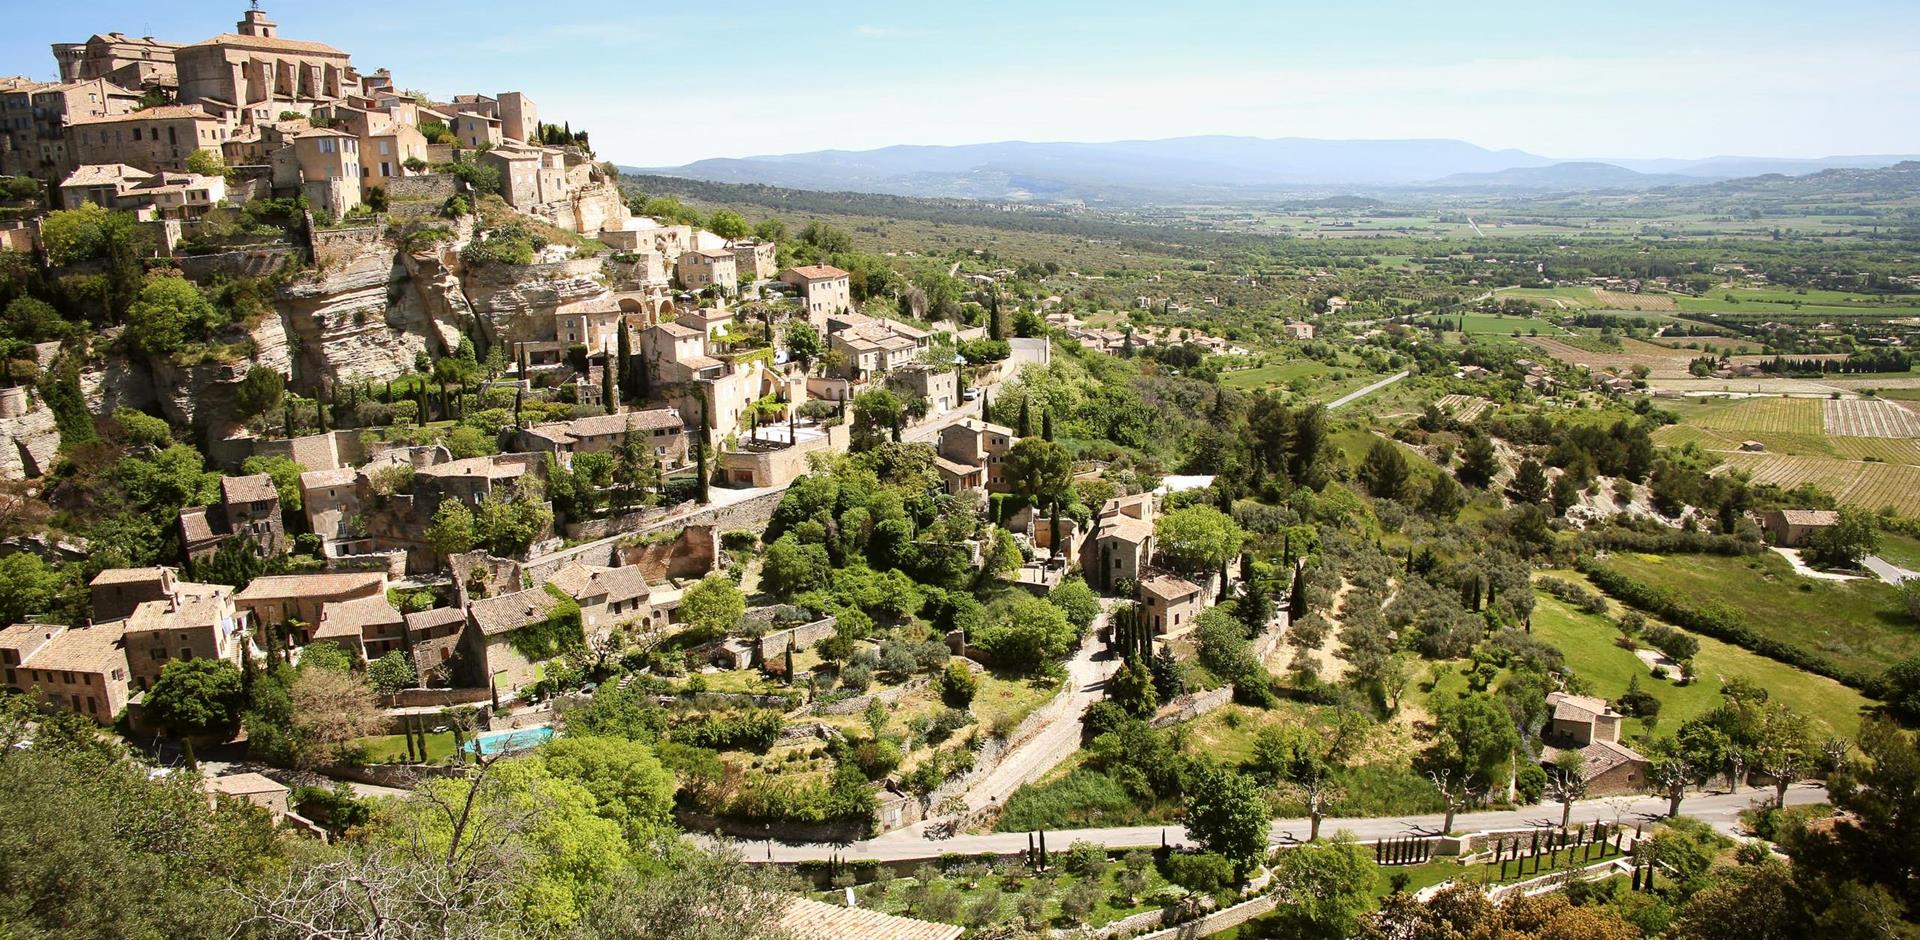 The Luberon. France